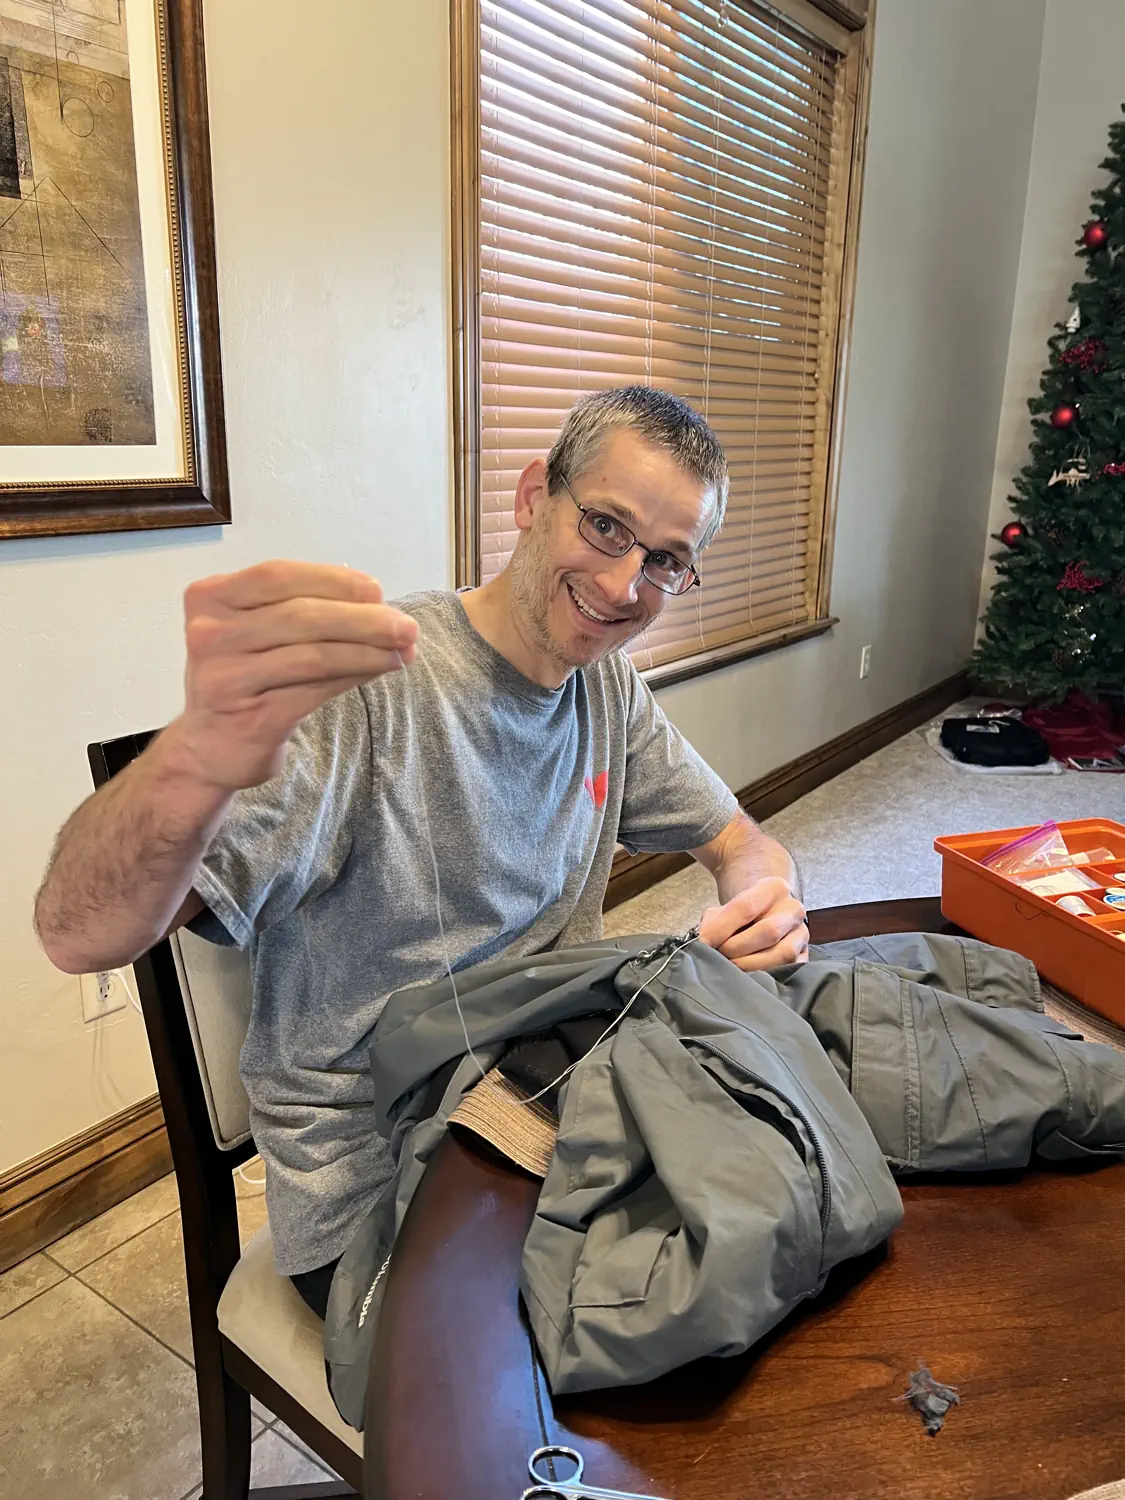 Keith is sewing his ski pants, yet again, before heading out to ski at Snowbird